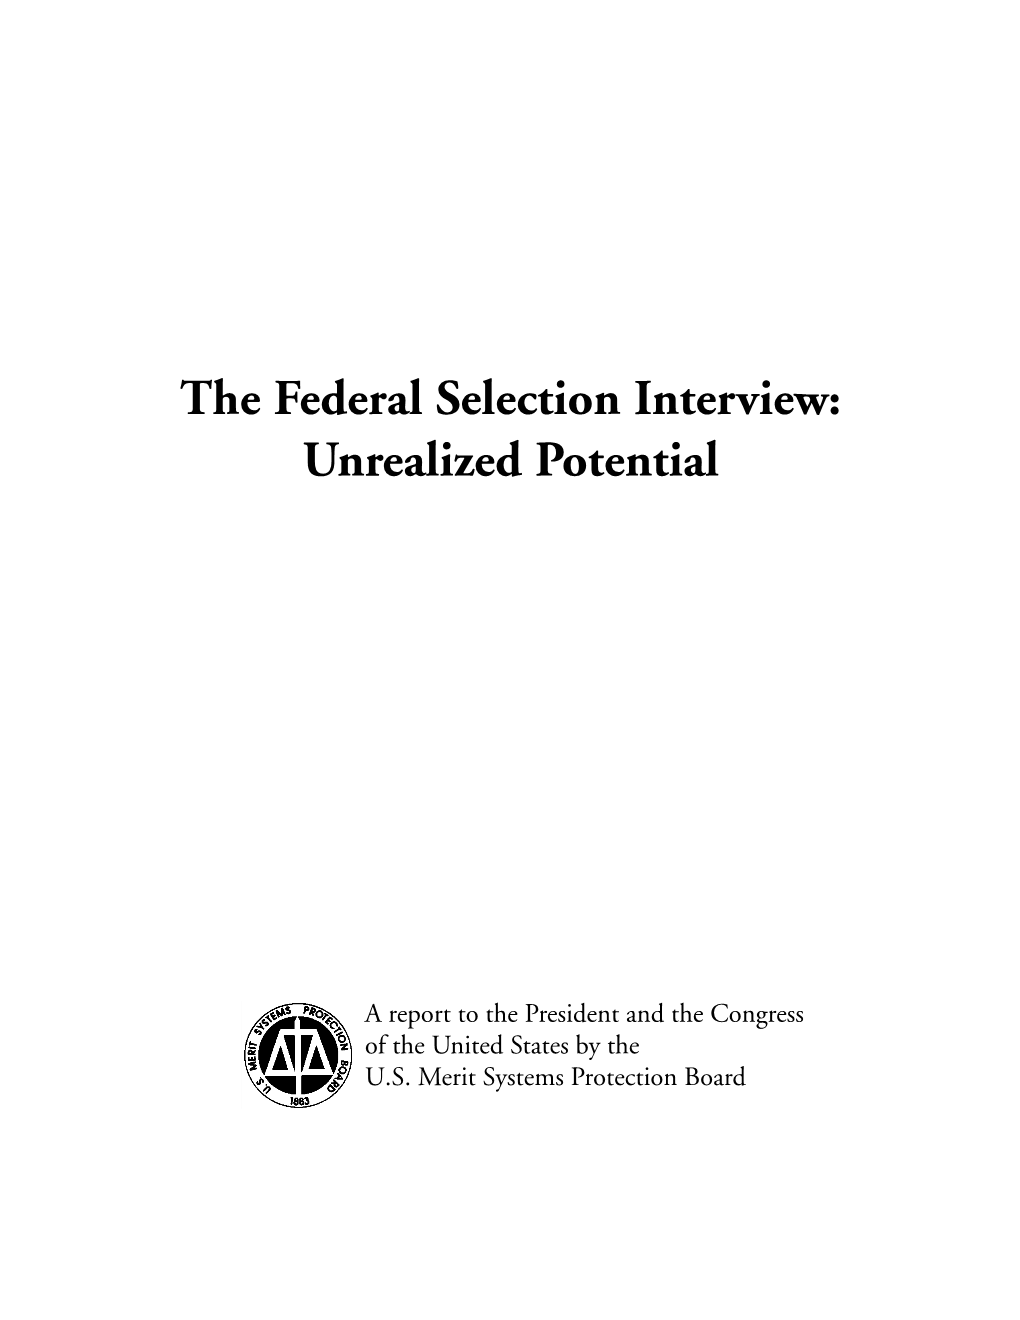 The Federal Selection Interview: Unrealized Potential